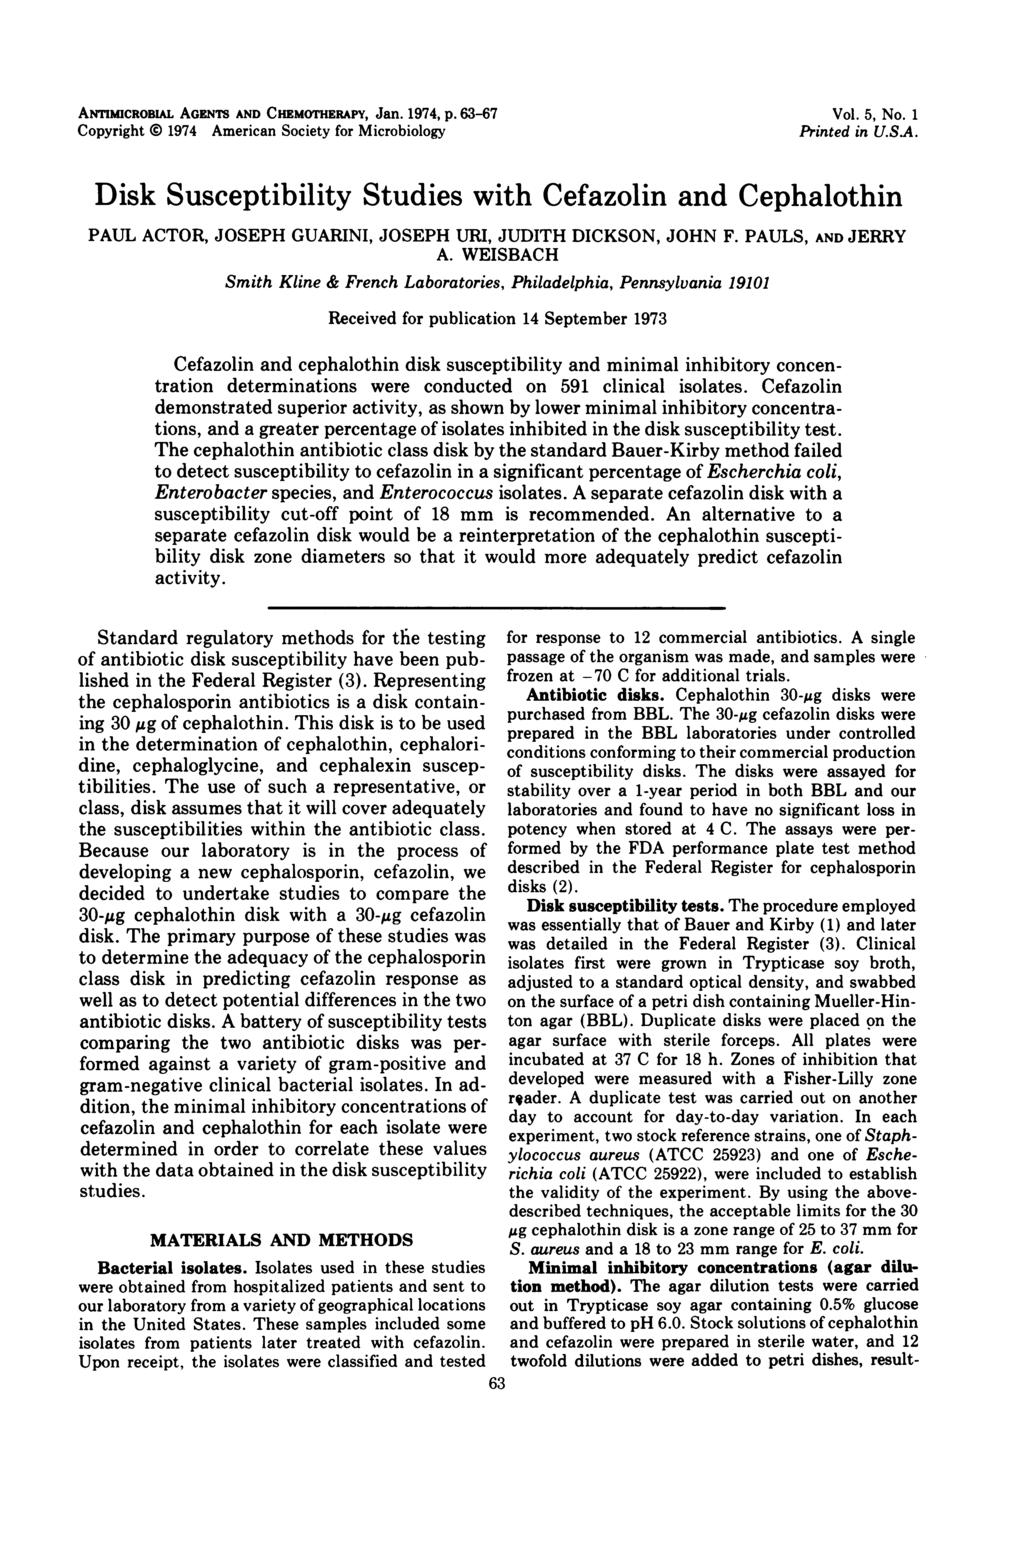 ANTIMICROBiAL AGENTS AND CHEMOTHEMRAPY, Jan. 1974, p. 63-67 Copyright i 1974 American Society for Microbiology Vol. 5, No. 1 Printed in U.SA.